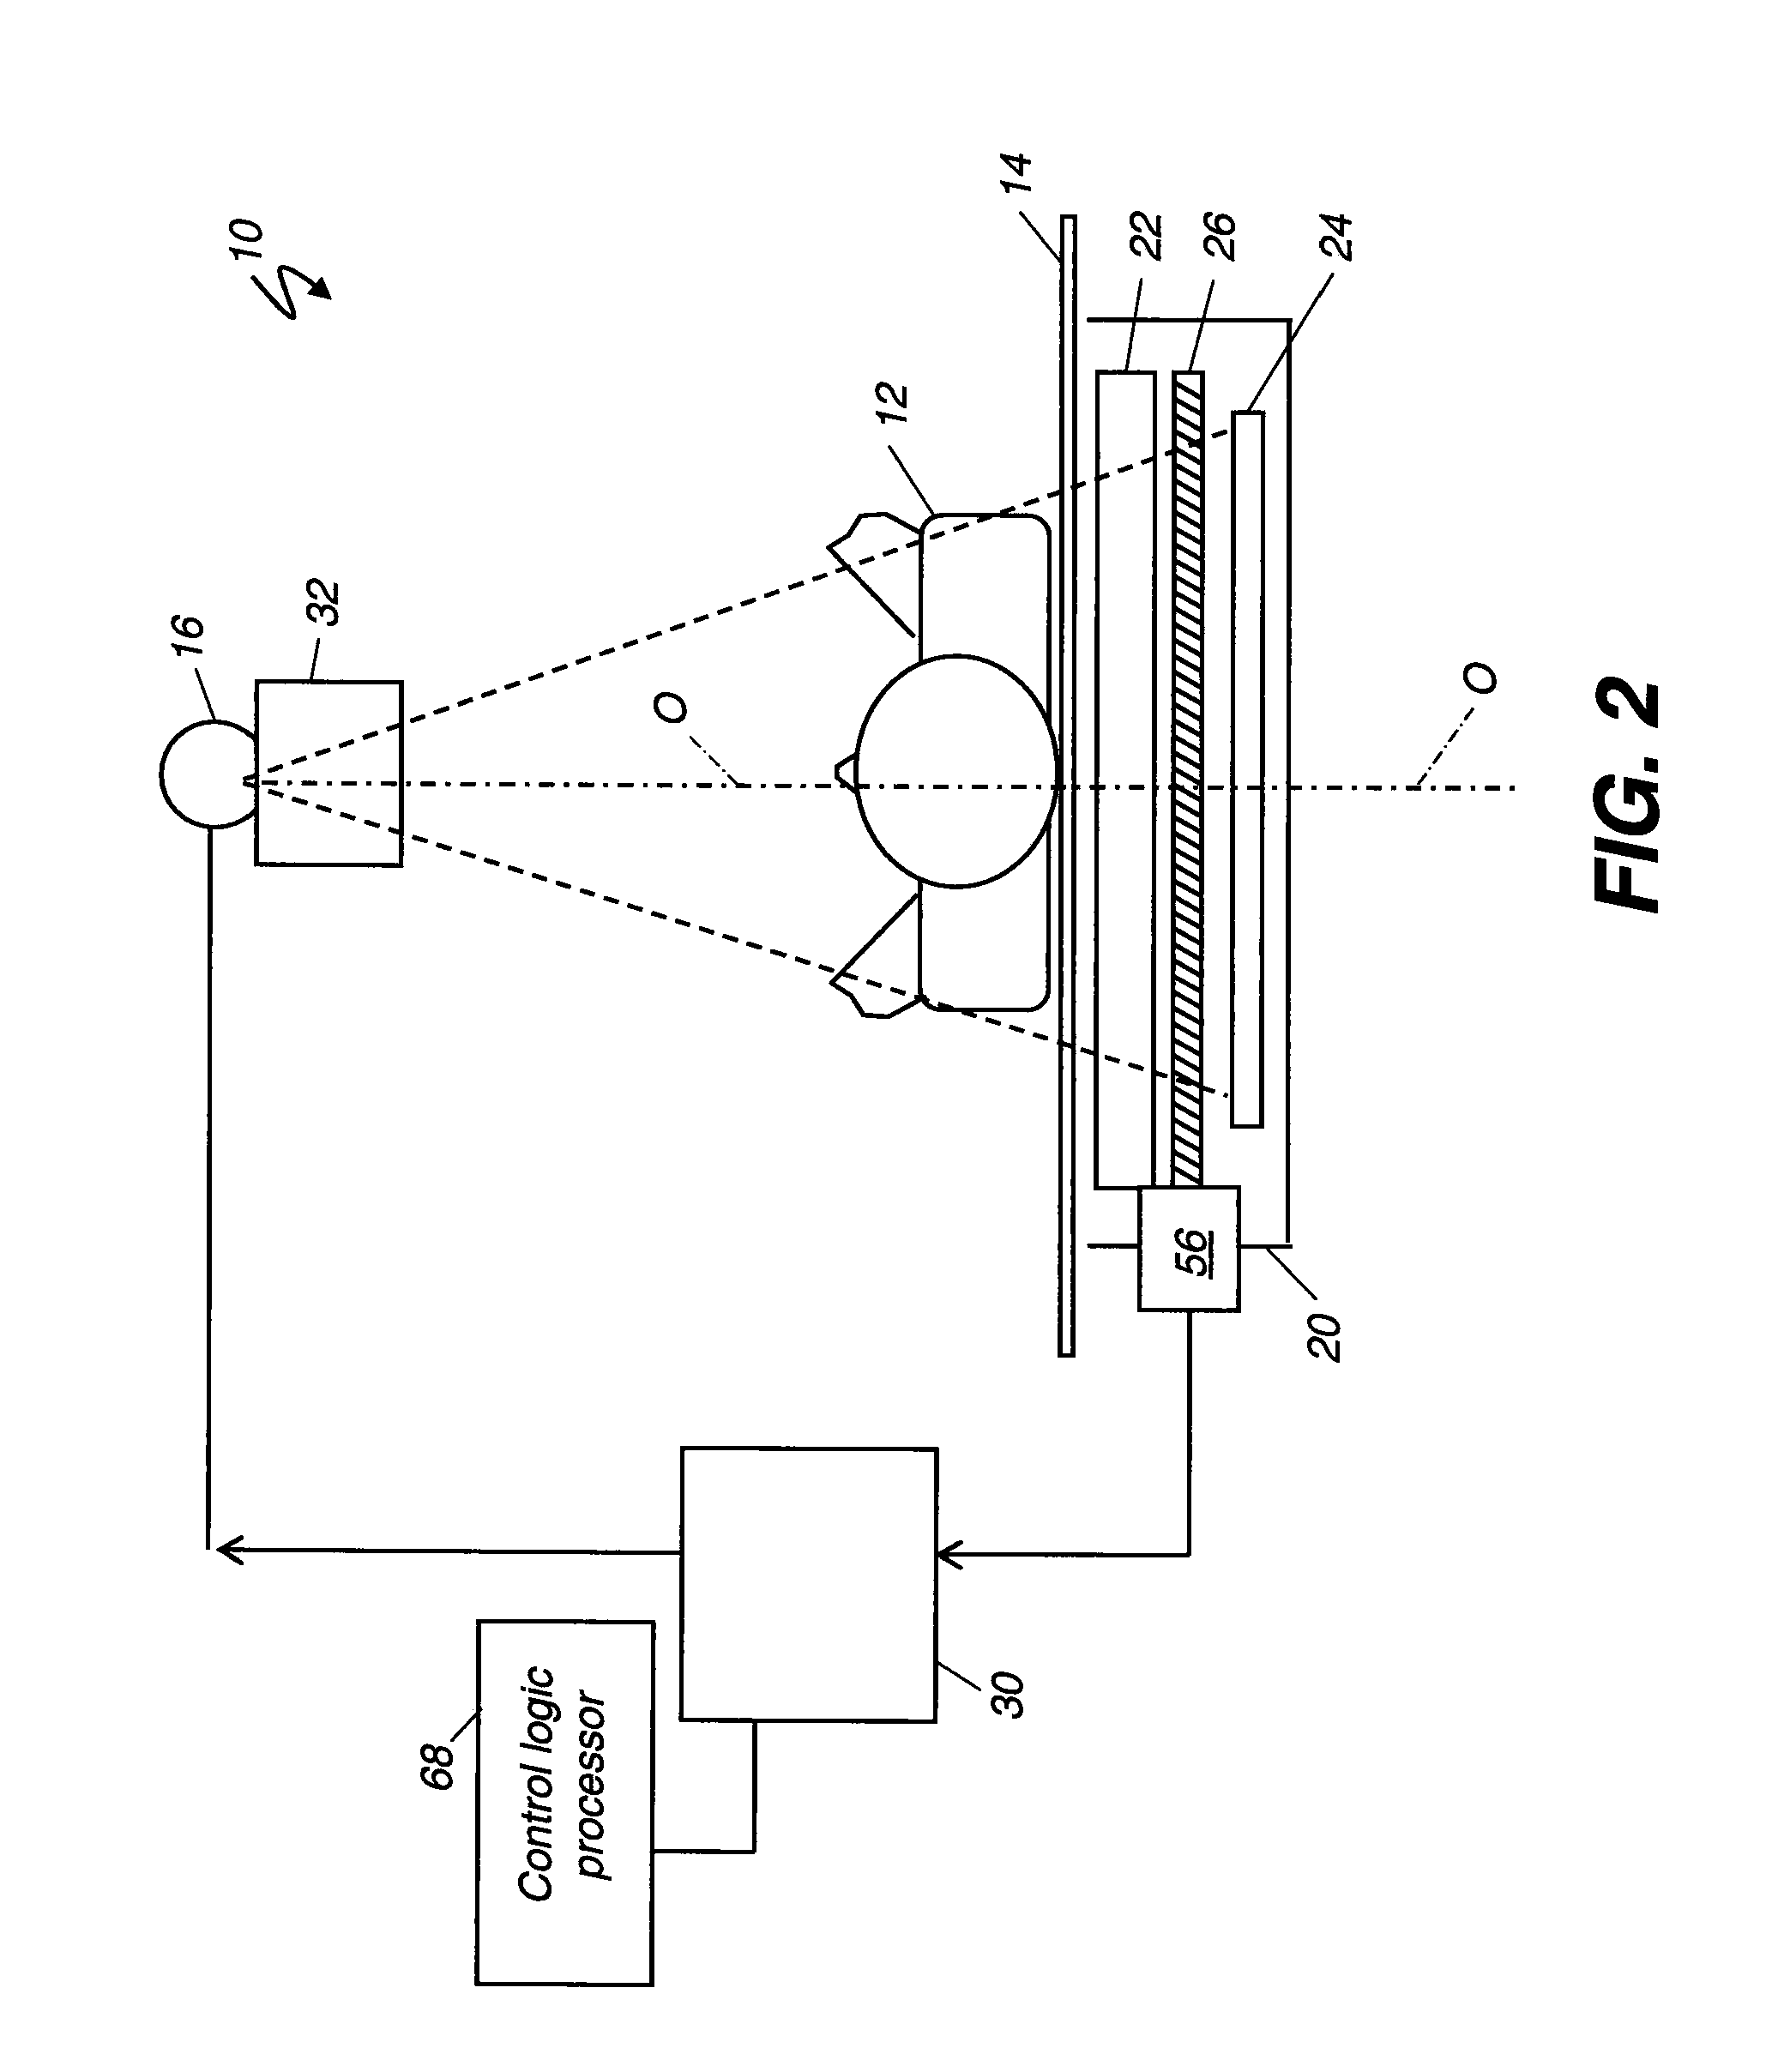 Digital detector calibration with known exposure